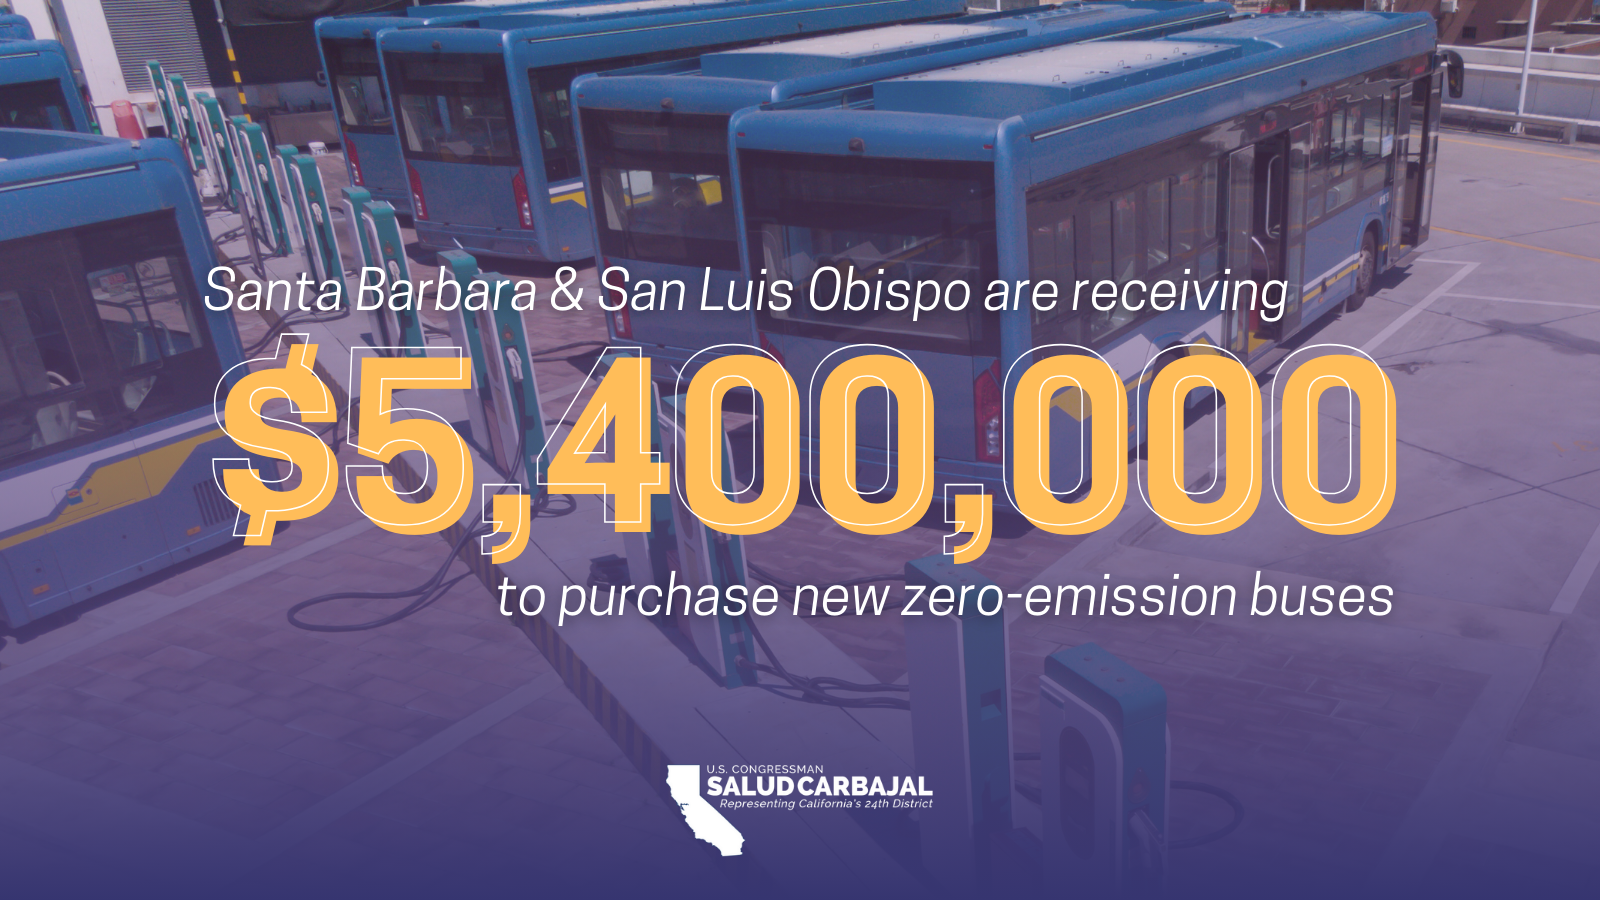 Rep. Carbajal Announces $5.4 Million from Bipartisan Infrastructure Law to Support Purchase of Clean Electric Buses in Santa Barbara and San Luis Obispo